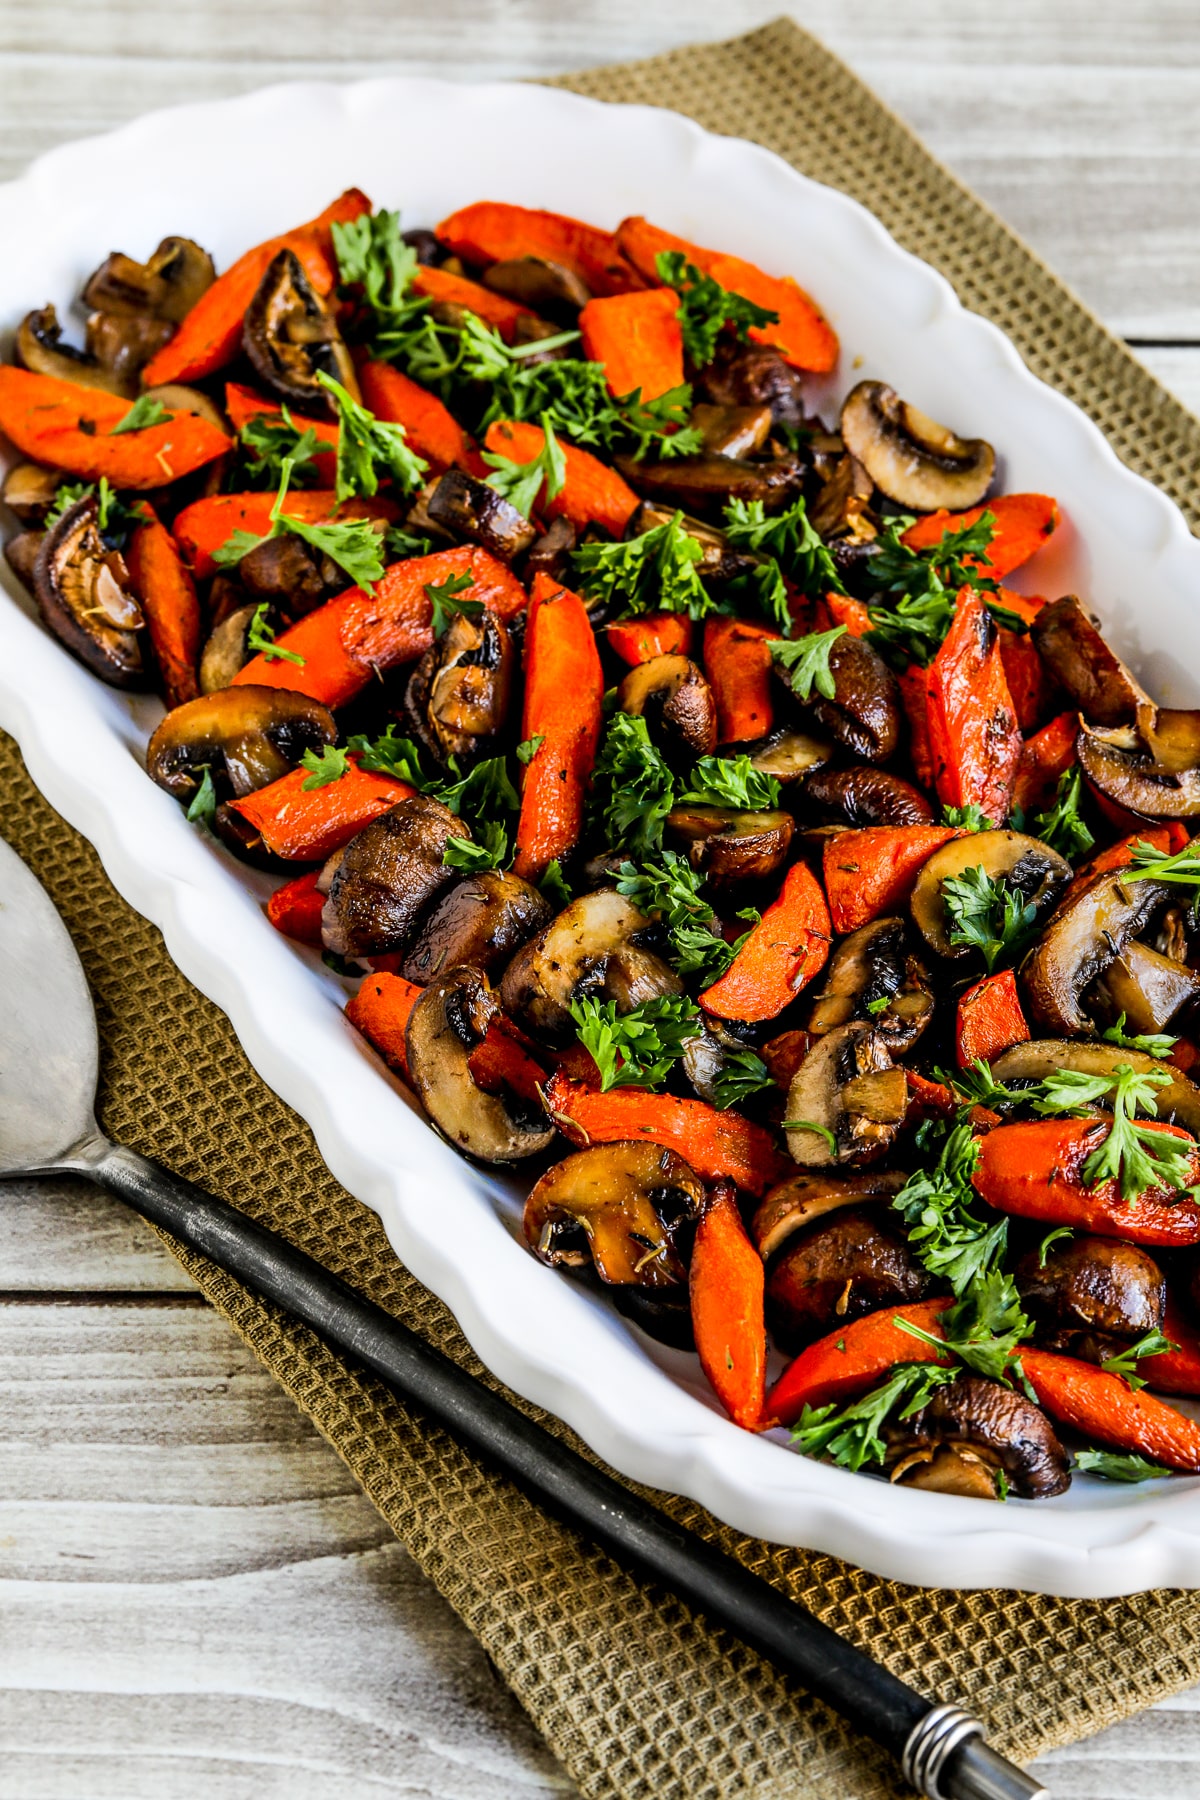 Roasted carrots and mushrooms laid out on a serving plate with parsley garnish